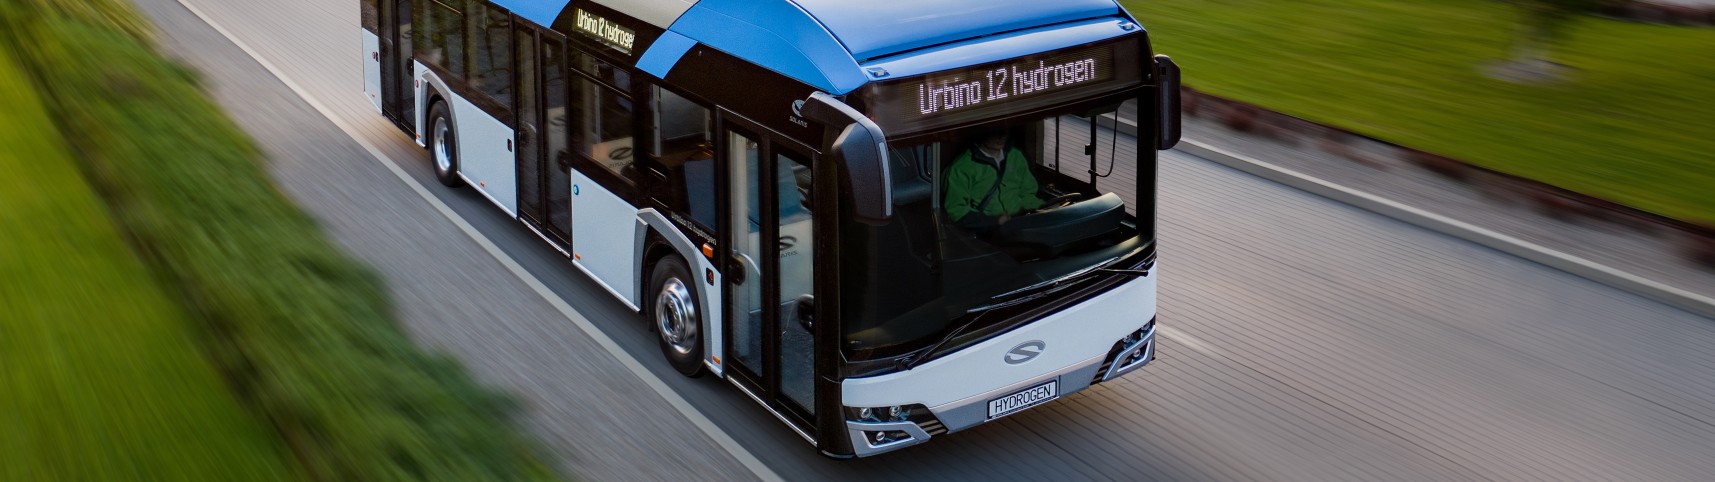 Hydrogen Solaris buses to go to Venice